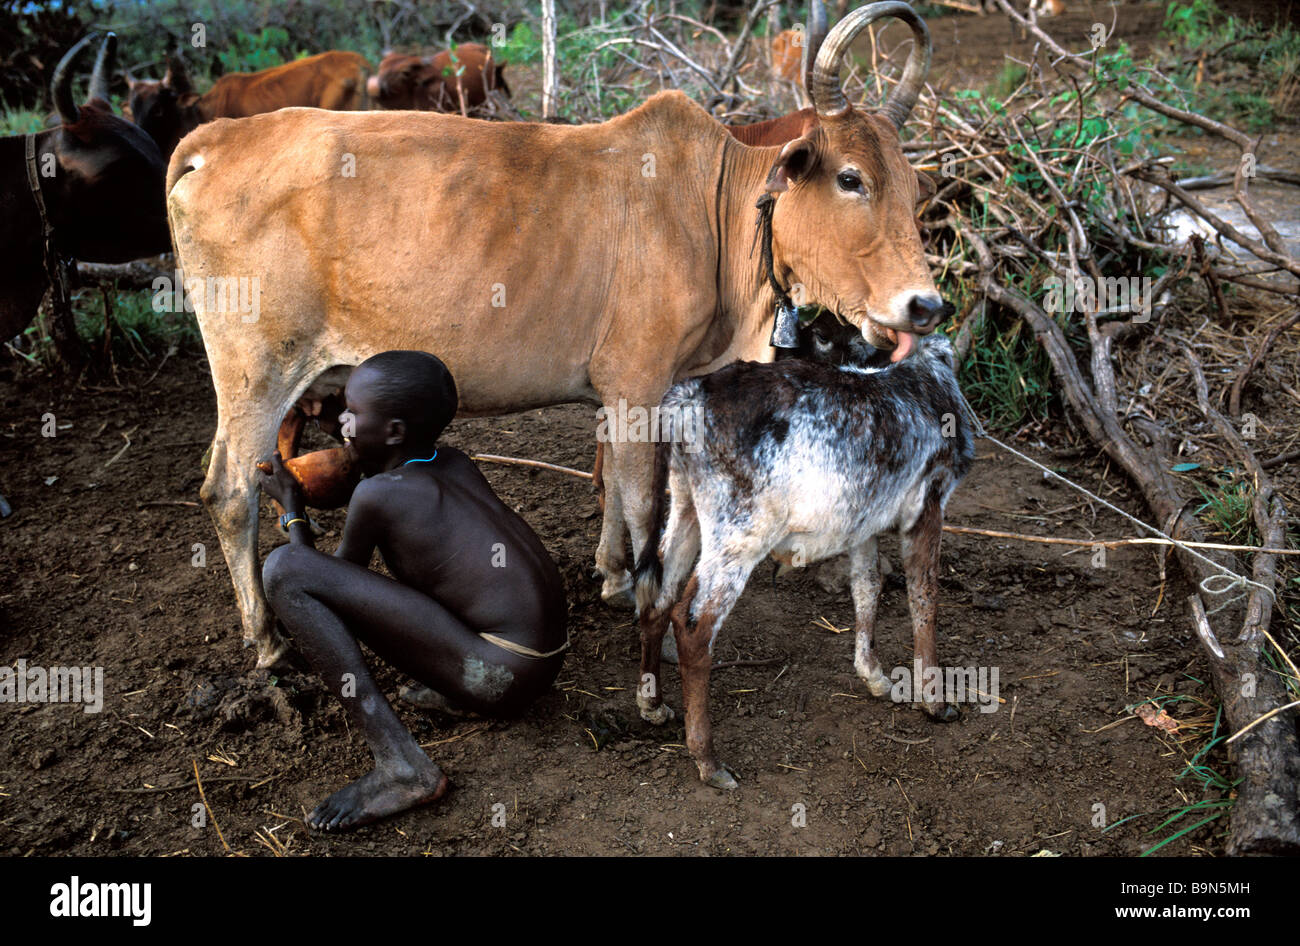 Ethiopia, Lower Omo Valley, classified as World Heritage by UNESCO, Surma boy milking a cow, cattle is a sign of wealth and is Stock Photo